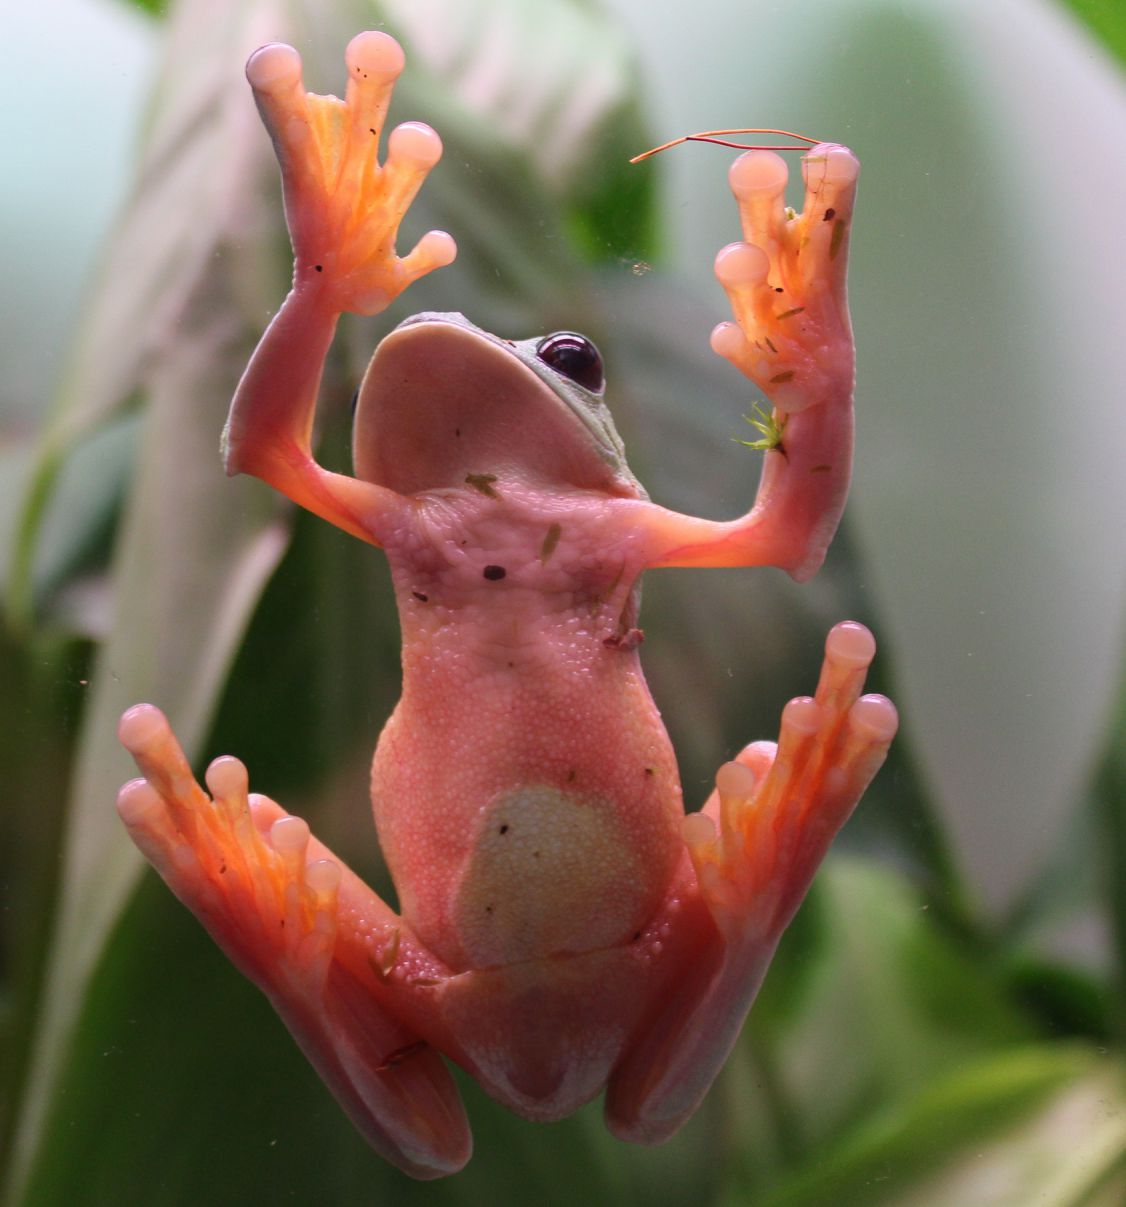 Researchers believe that studying frogs outside their natural habitat may help protect them from extinction. Improving scientific understanding of their breeding and ideal environment could inform conservation projects
